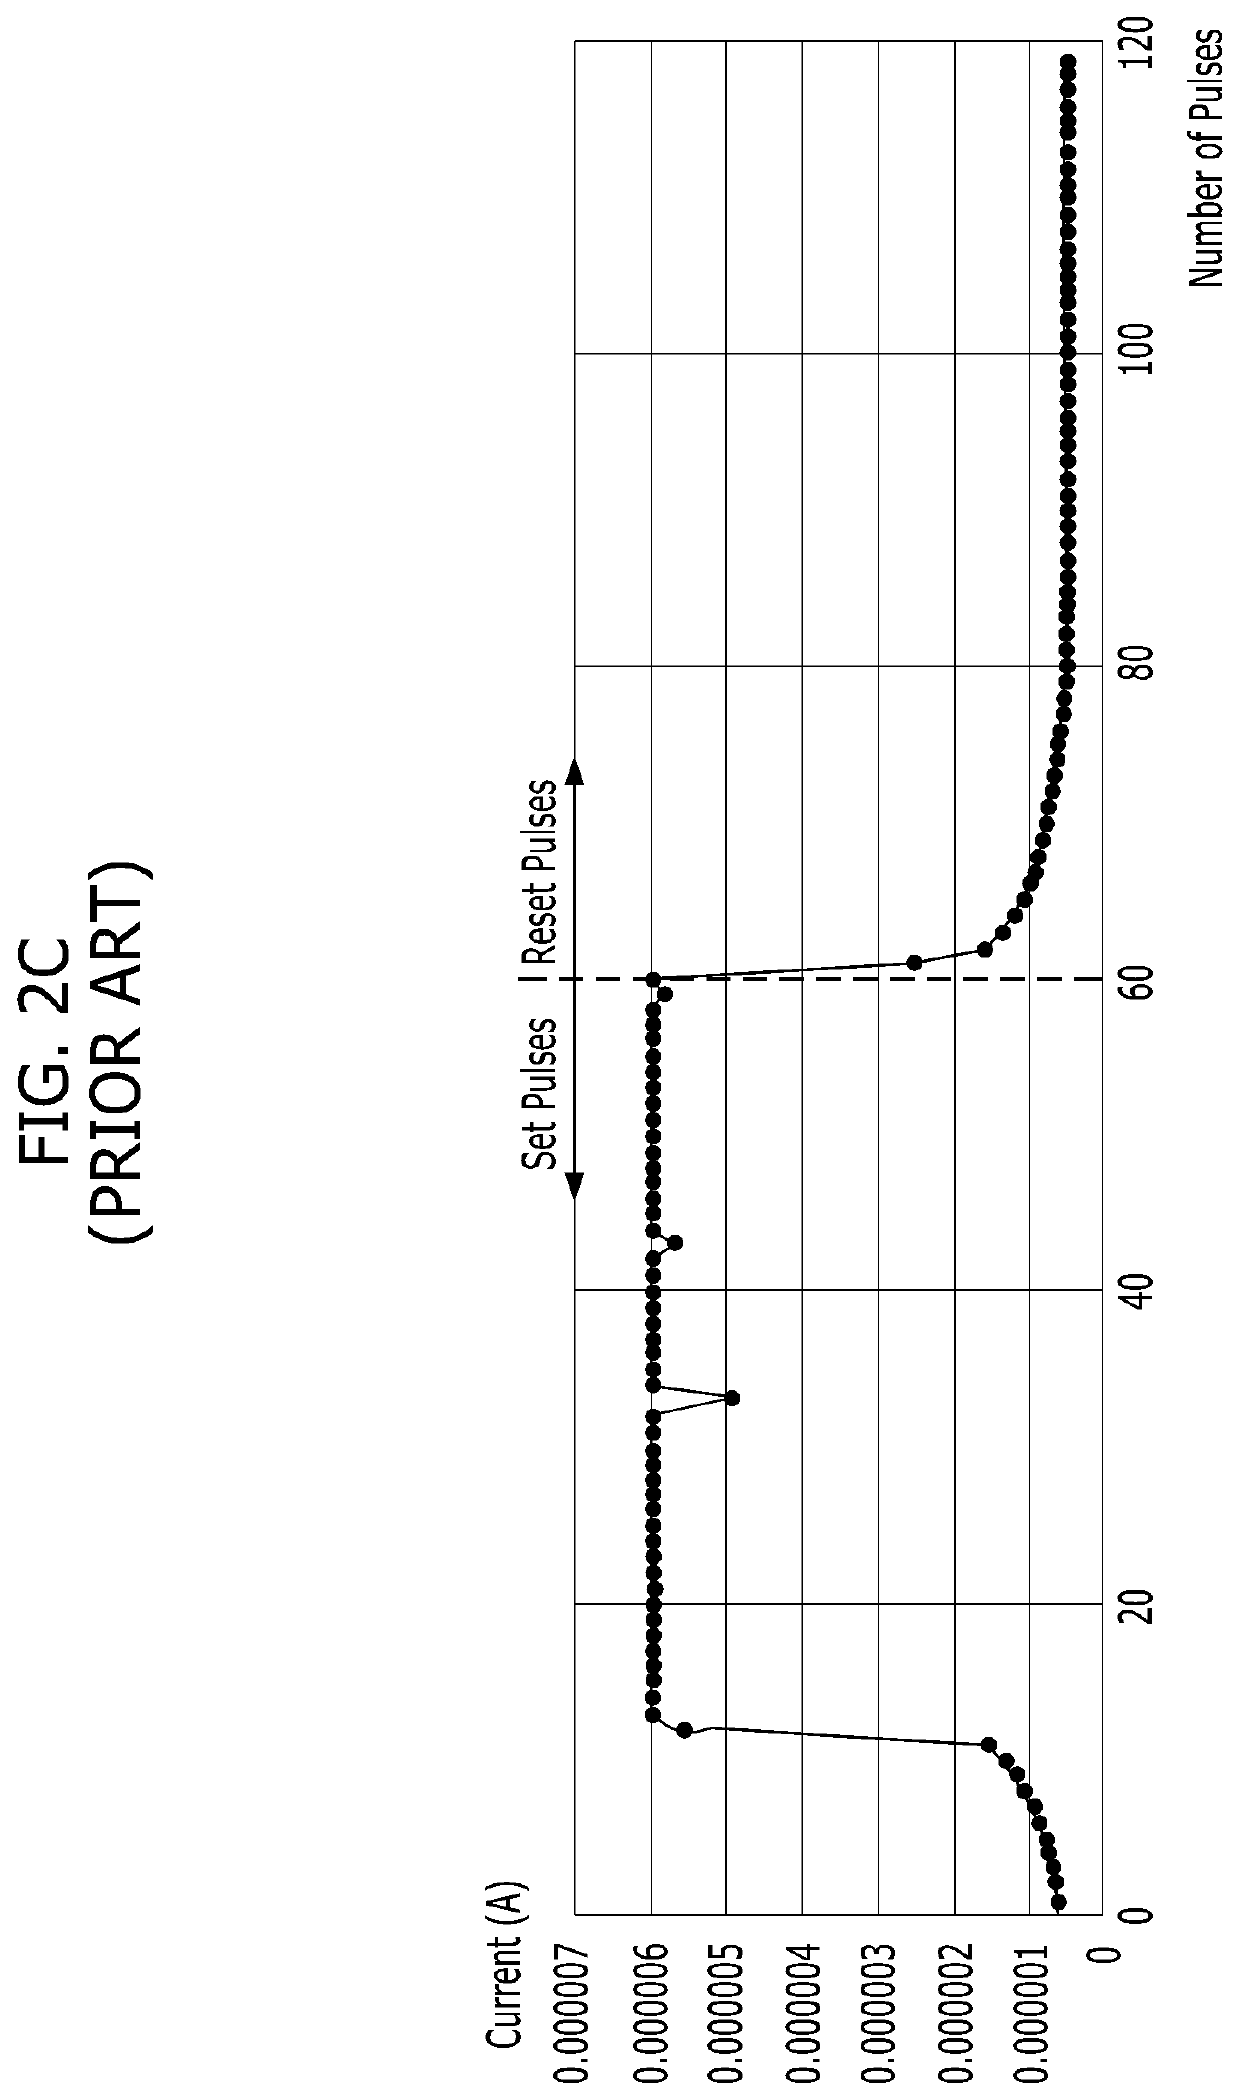 Neuromorphic device including a synapse having a variable resistor and a transistor connected in parallel with each other